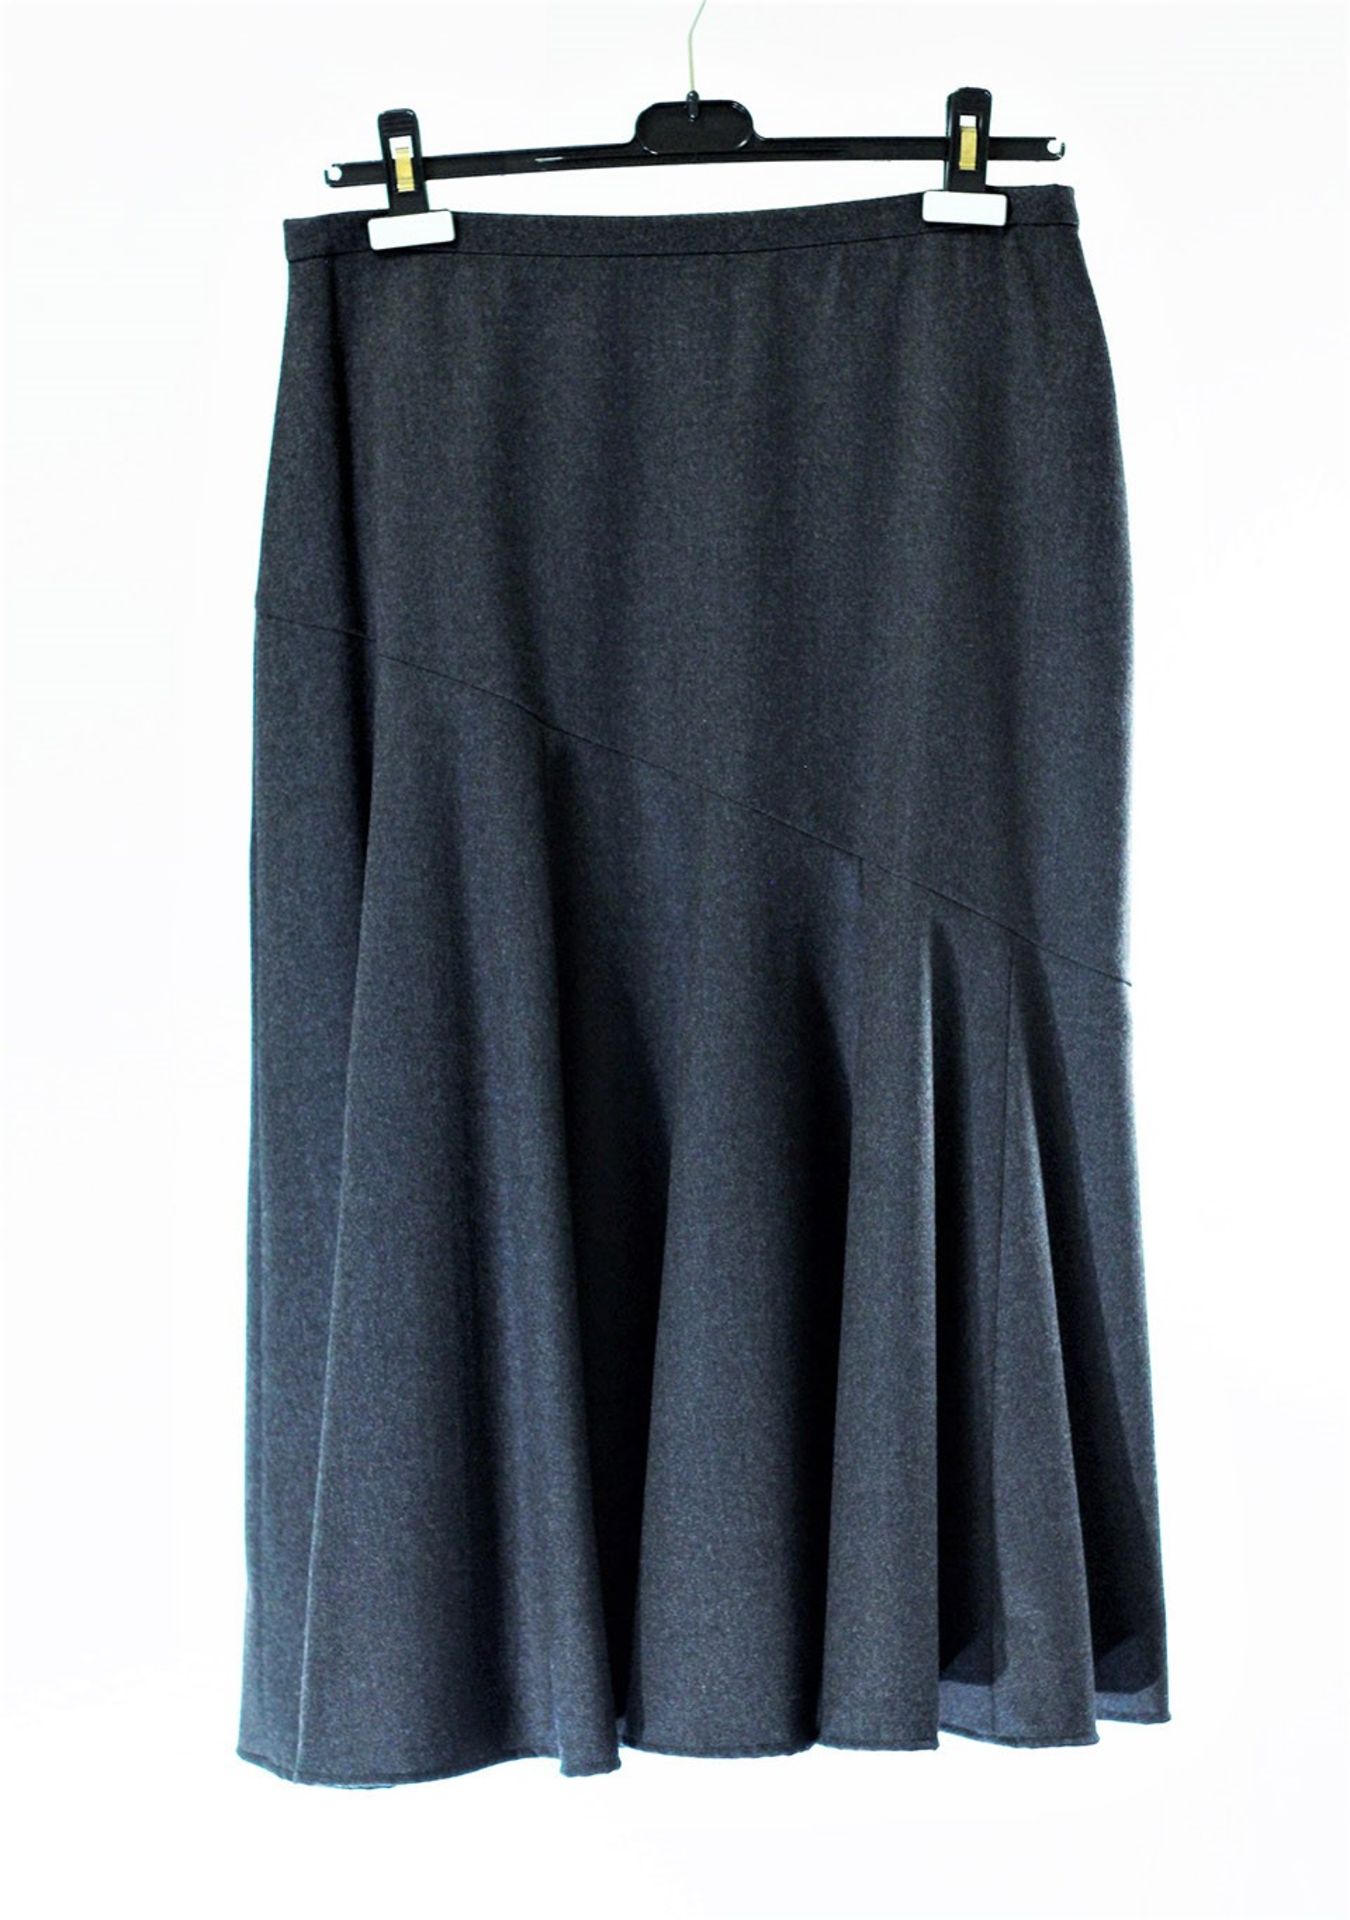 1 x Anne Belin Dark Grey Skirt - Size: 18 - Material: 100% Wool - From a High End Clothing - Image 7 of 9